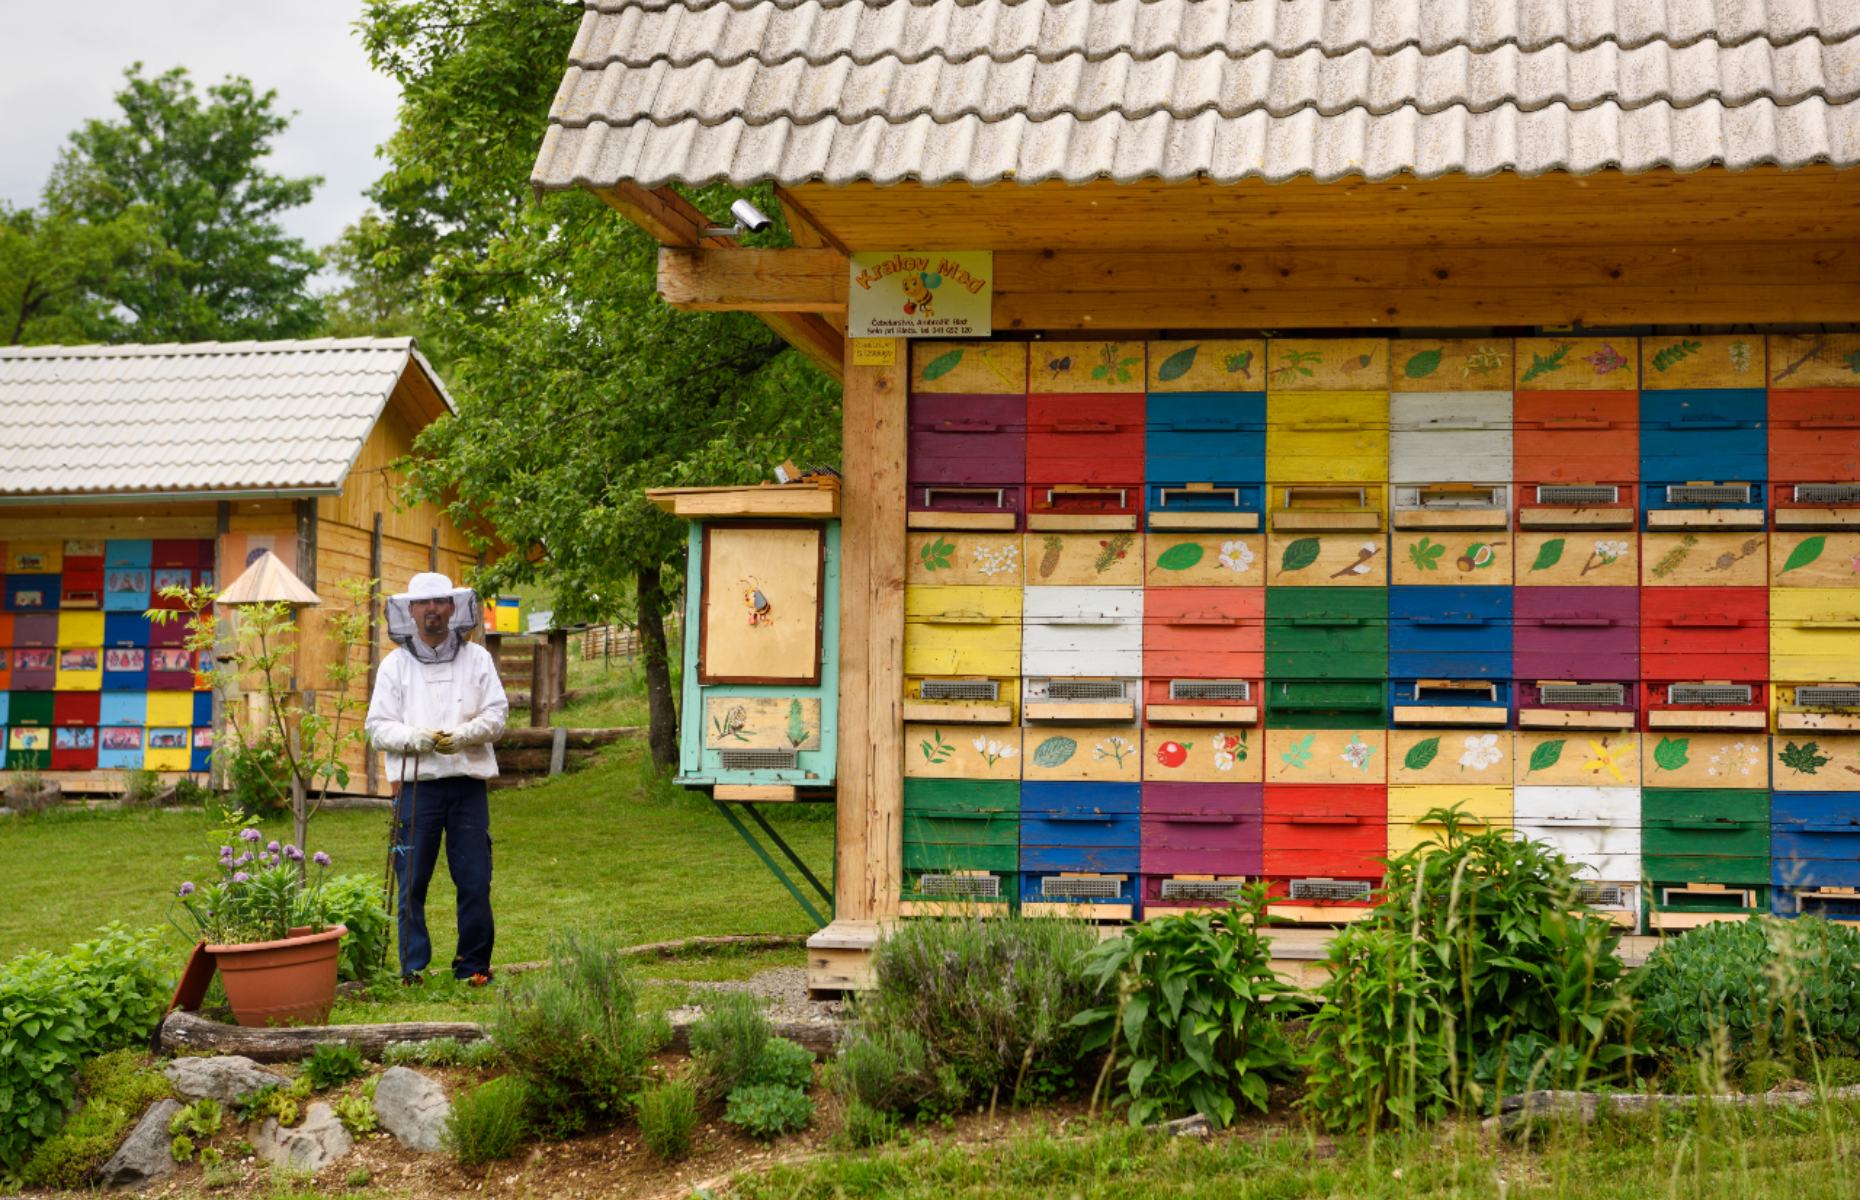 Traditional beekeeping in Bled, Slovenia (Image: Reimar/Shutterstock